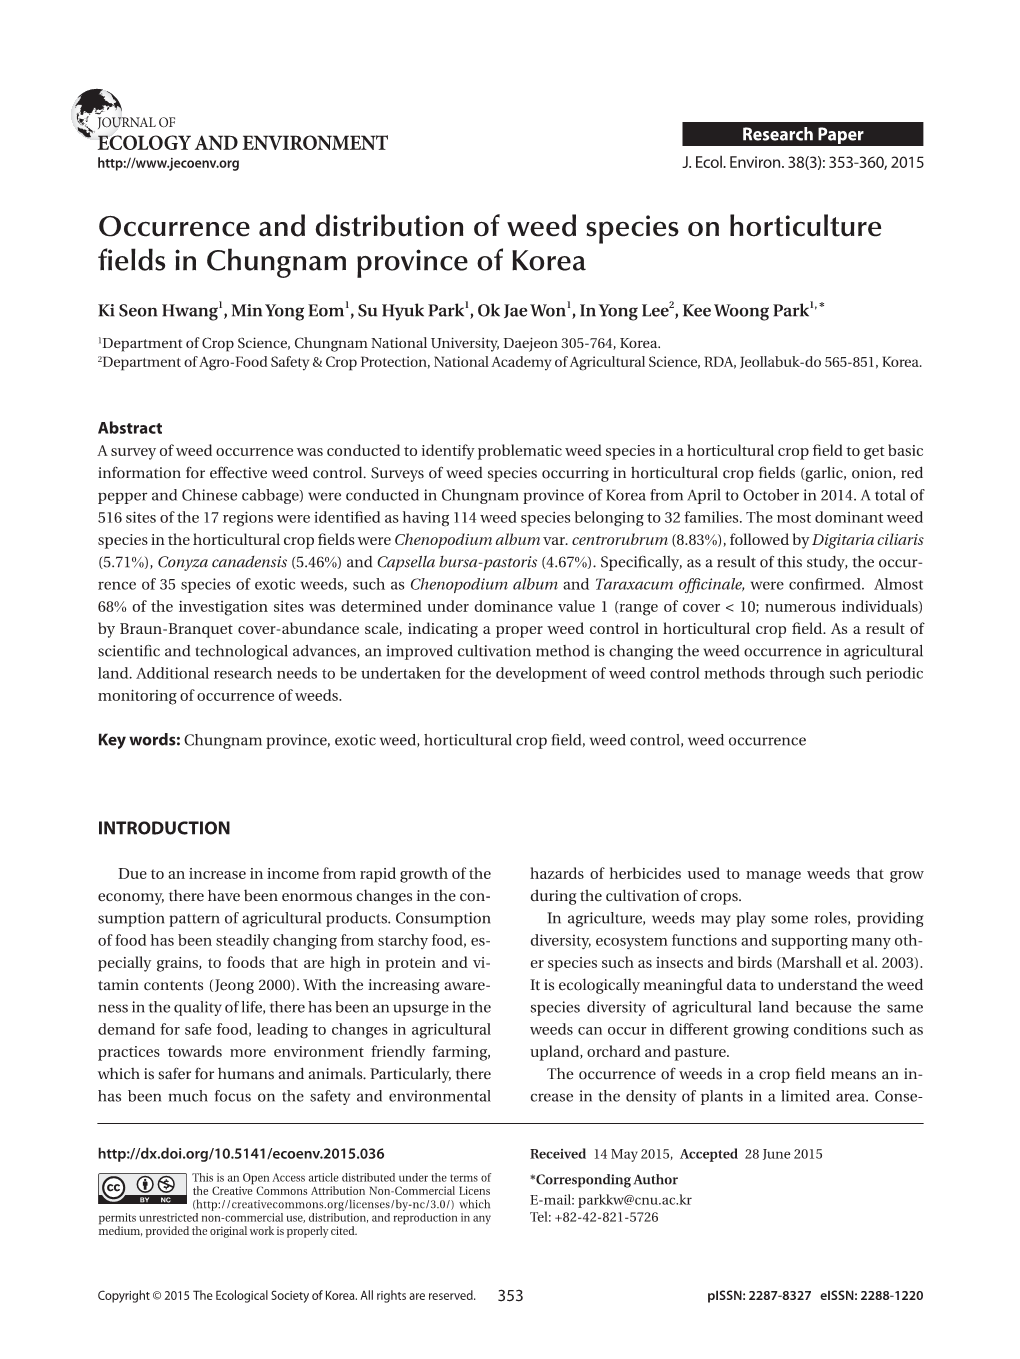 Occurrence and Distribution of Weed Species on Horticulture Fields in Chungnam Province of Korea